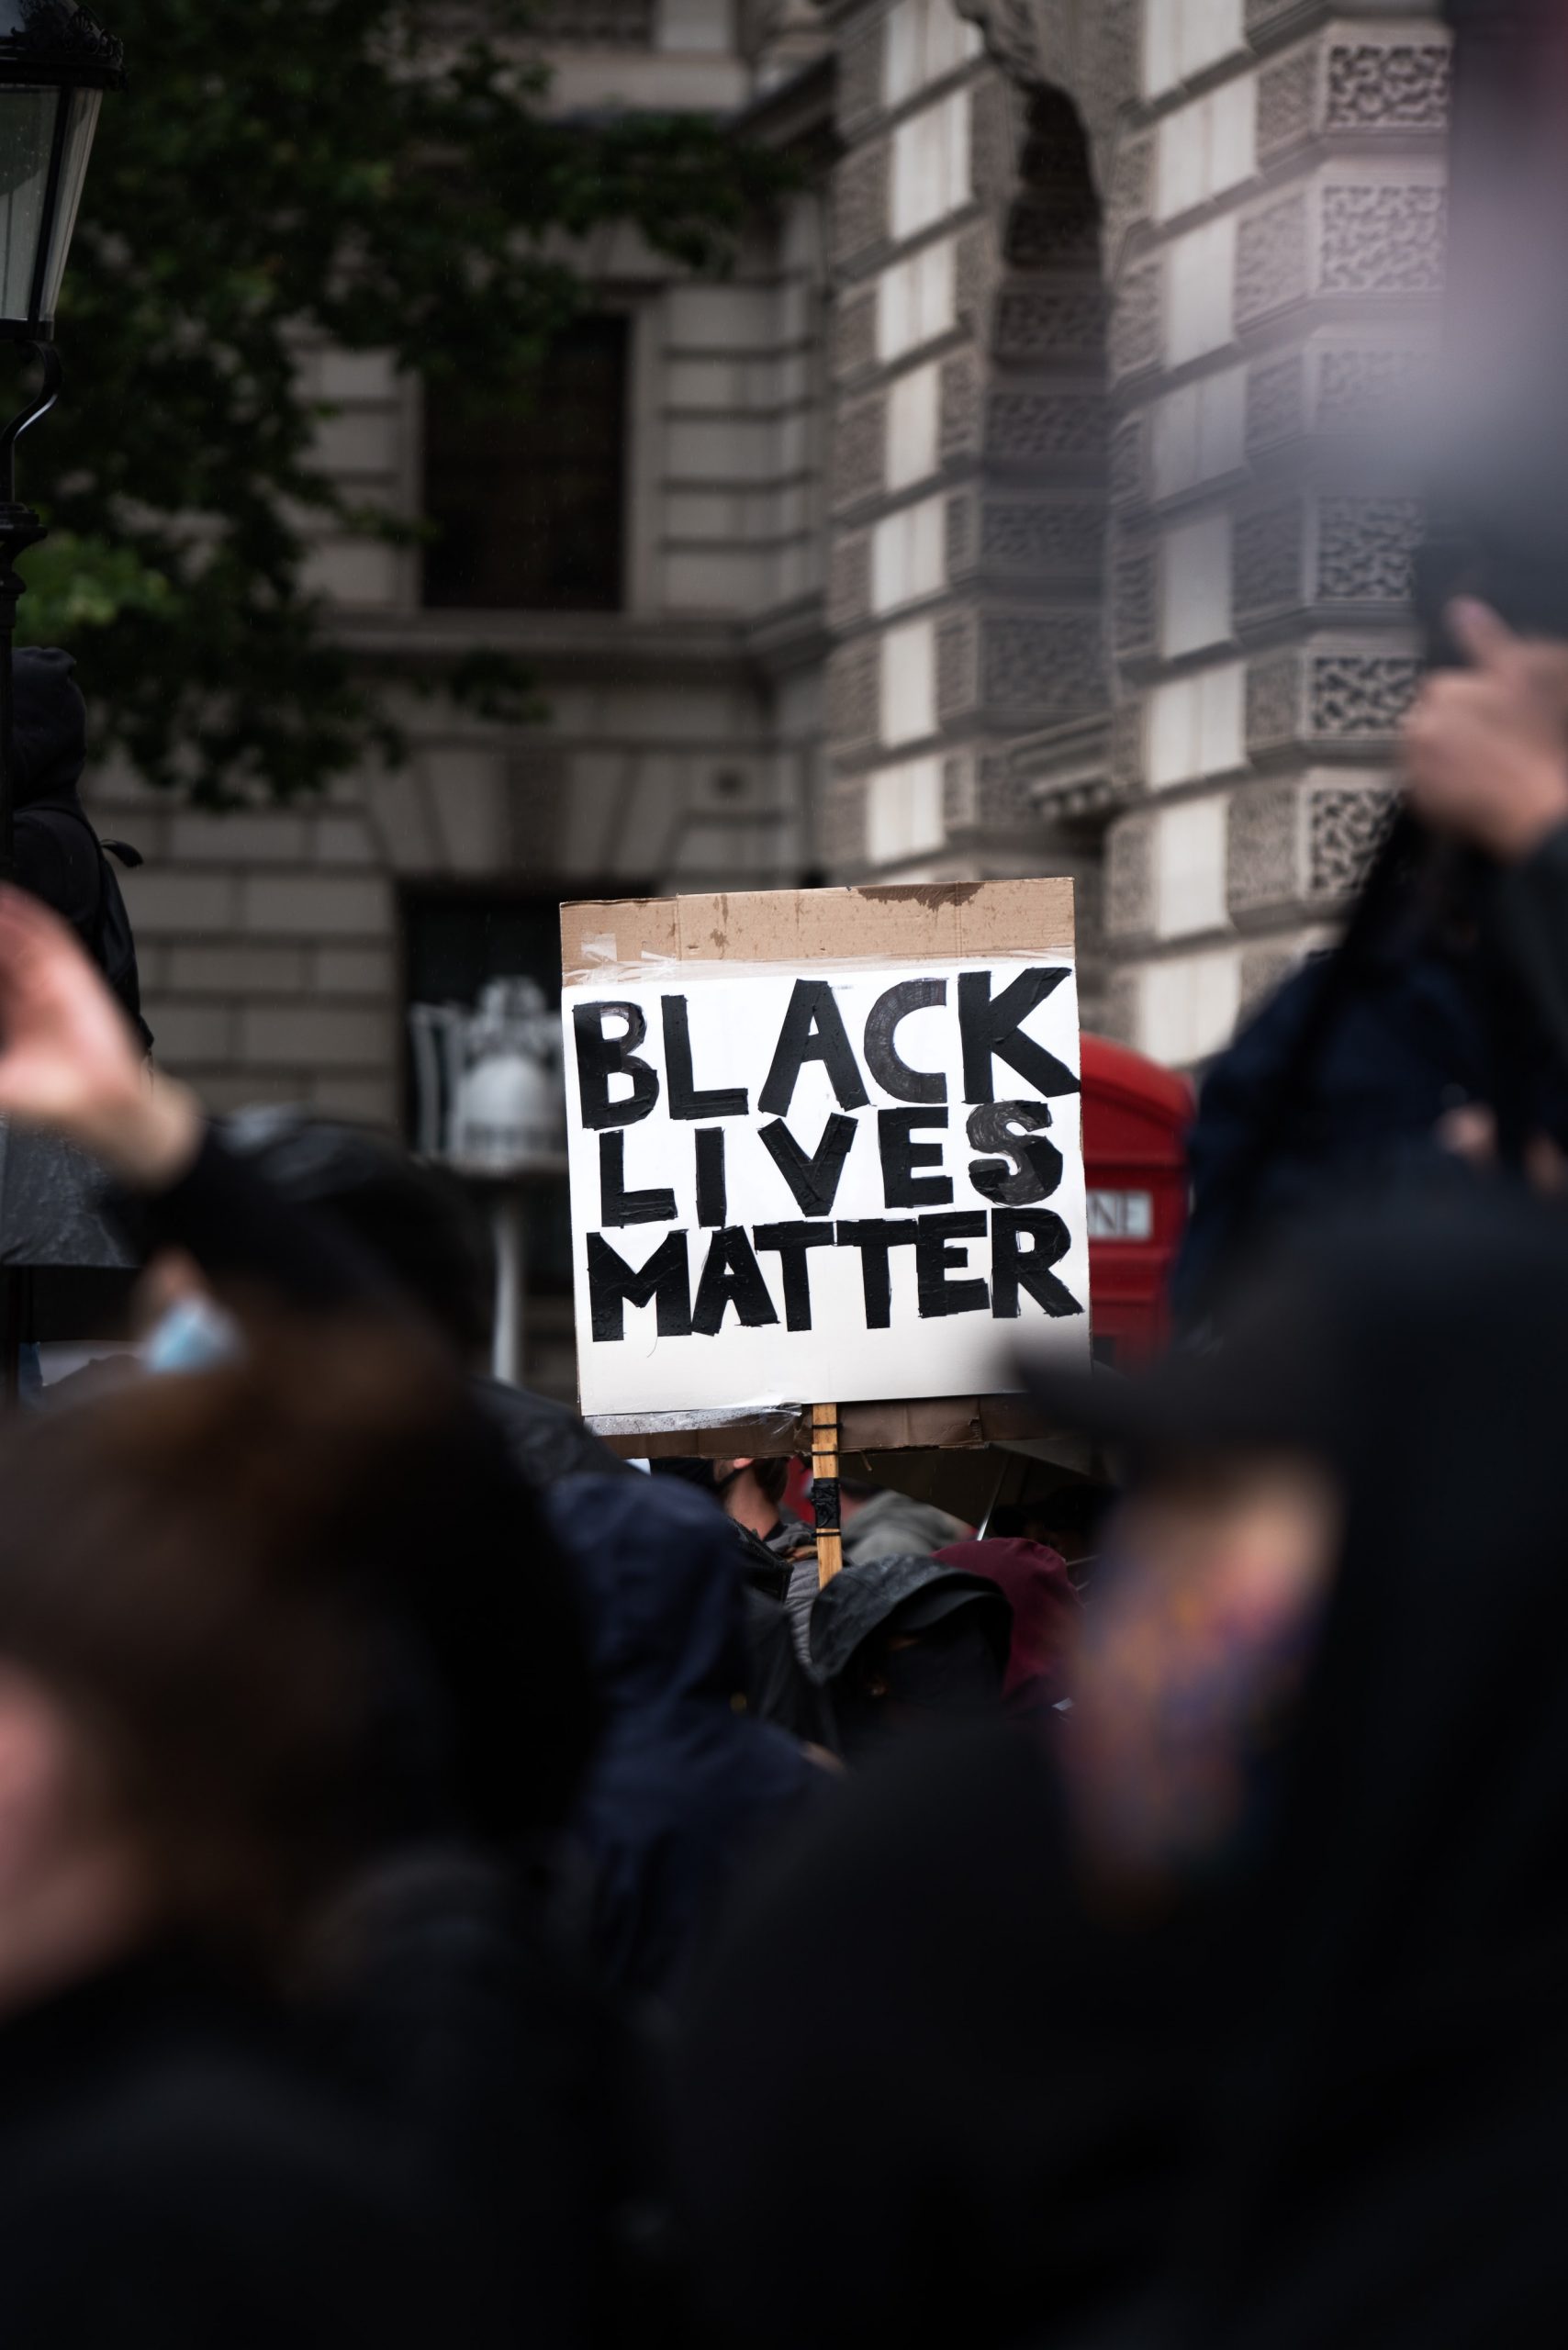 A sign reads "Black Lives Matter" on white card amidst a crowd